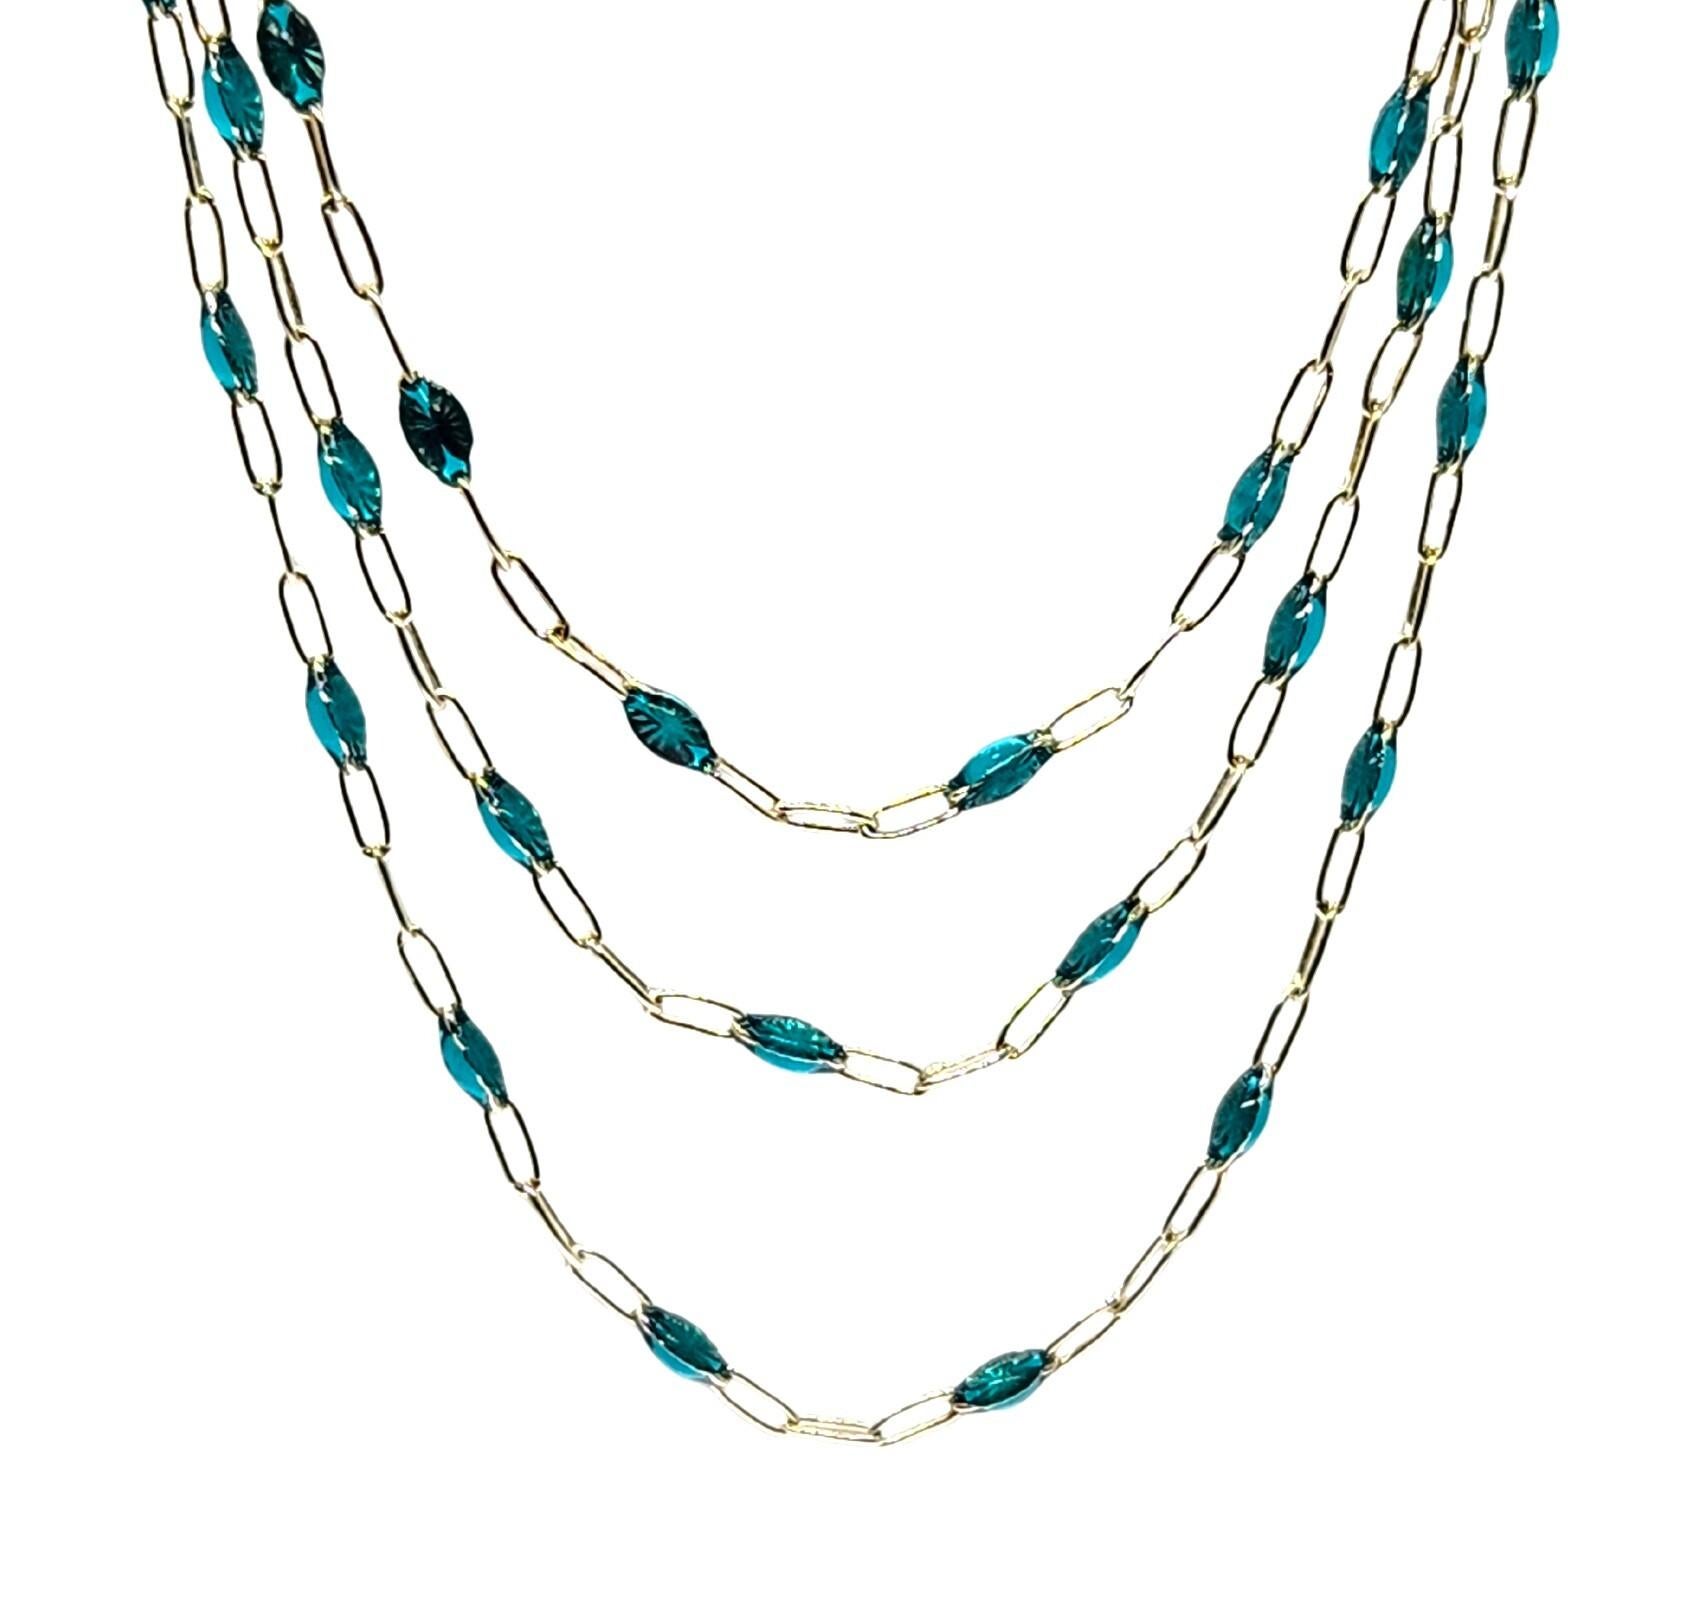 Sterling Silver Italian Chain in 3 lengths with Lobster clasps and a beautiful teal blue enamel in eye shapes. The chain look is casual with many options to wear a neck stack layered. Three lengths are offered in 16